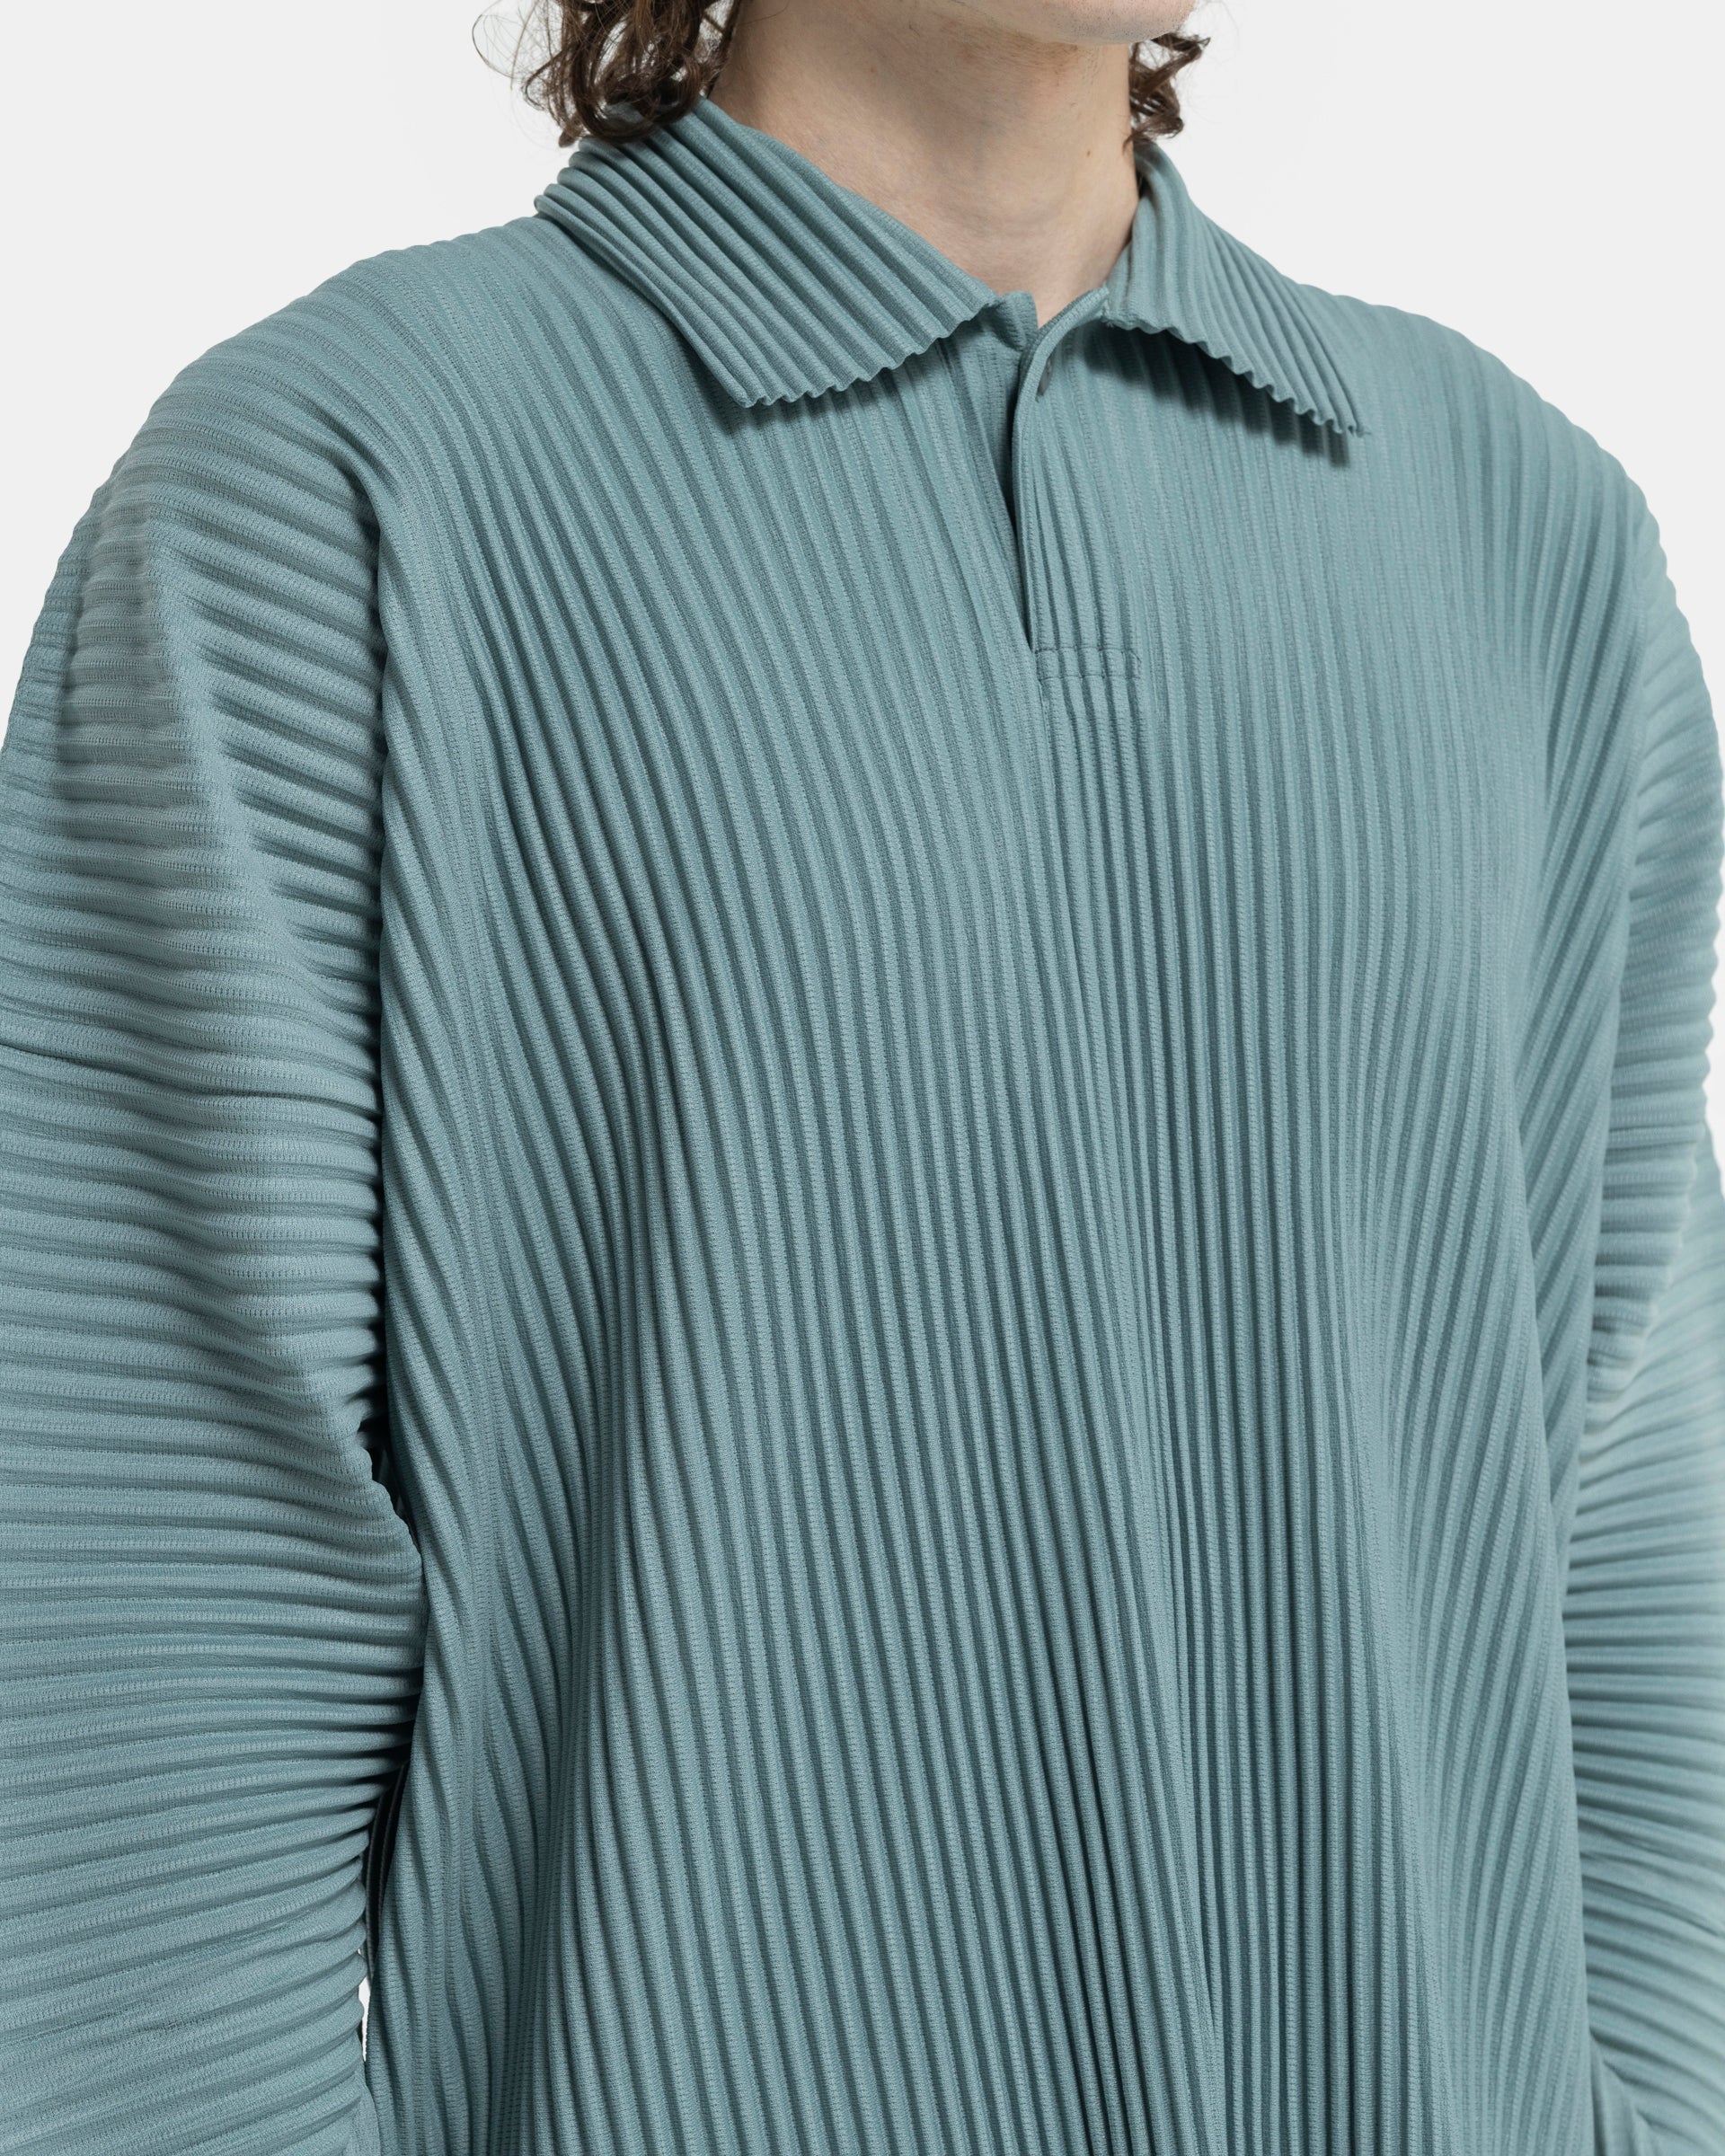 August Polo Shirt in Mint Grey